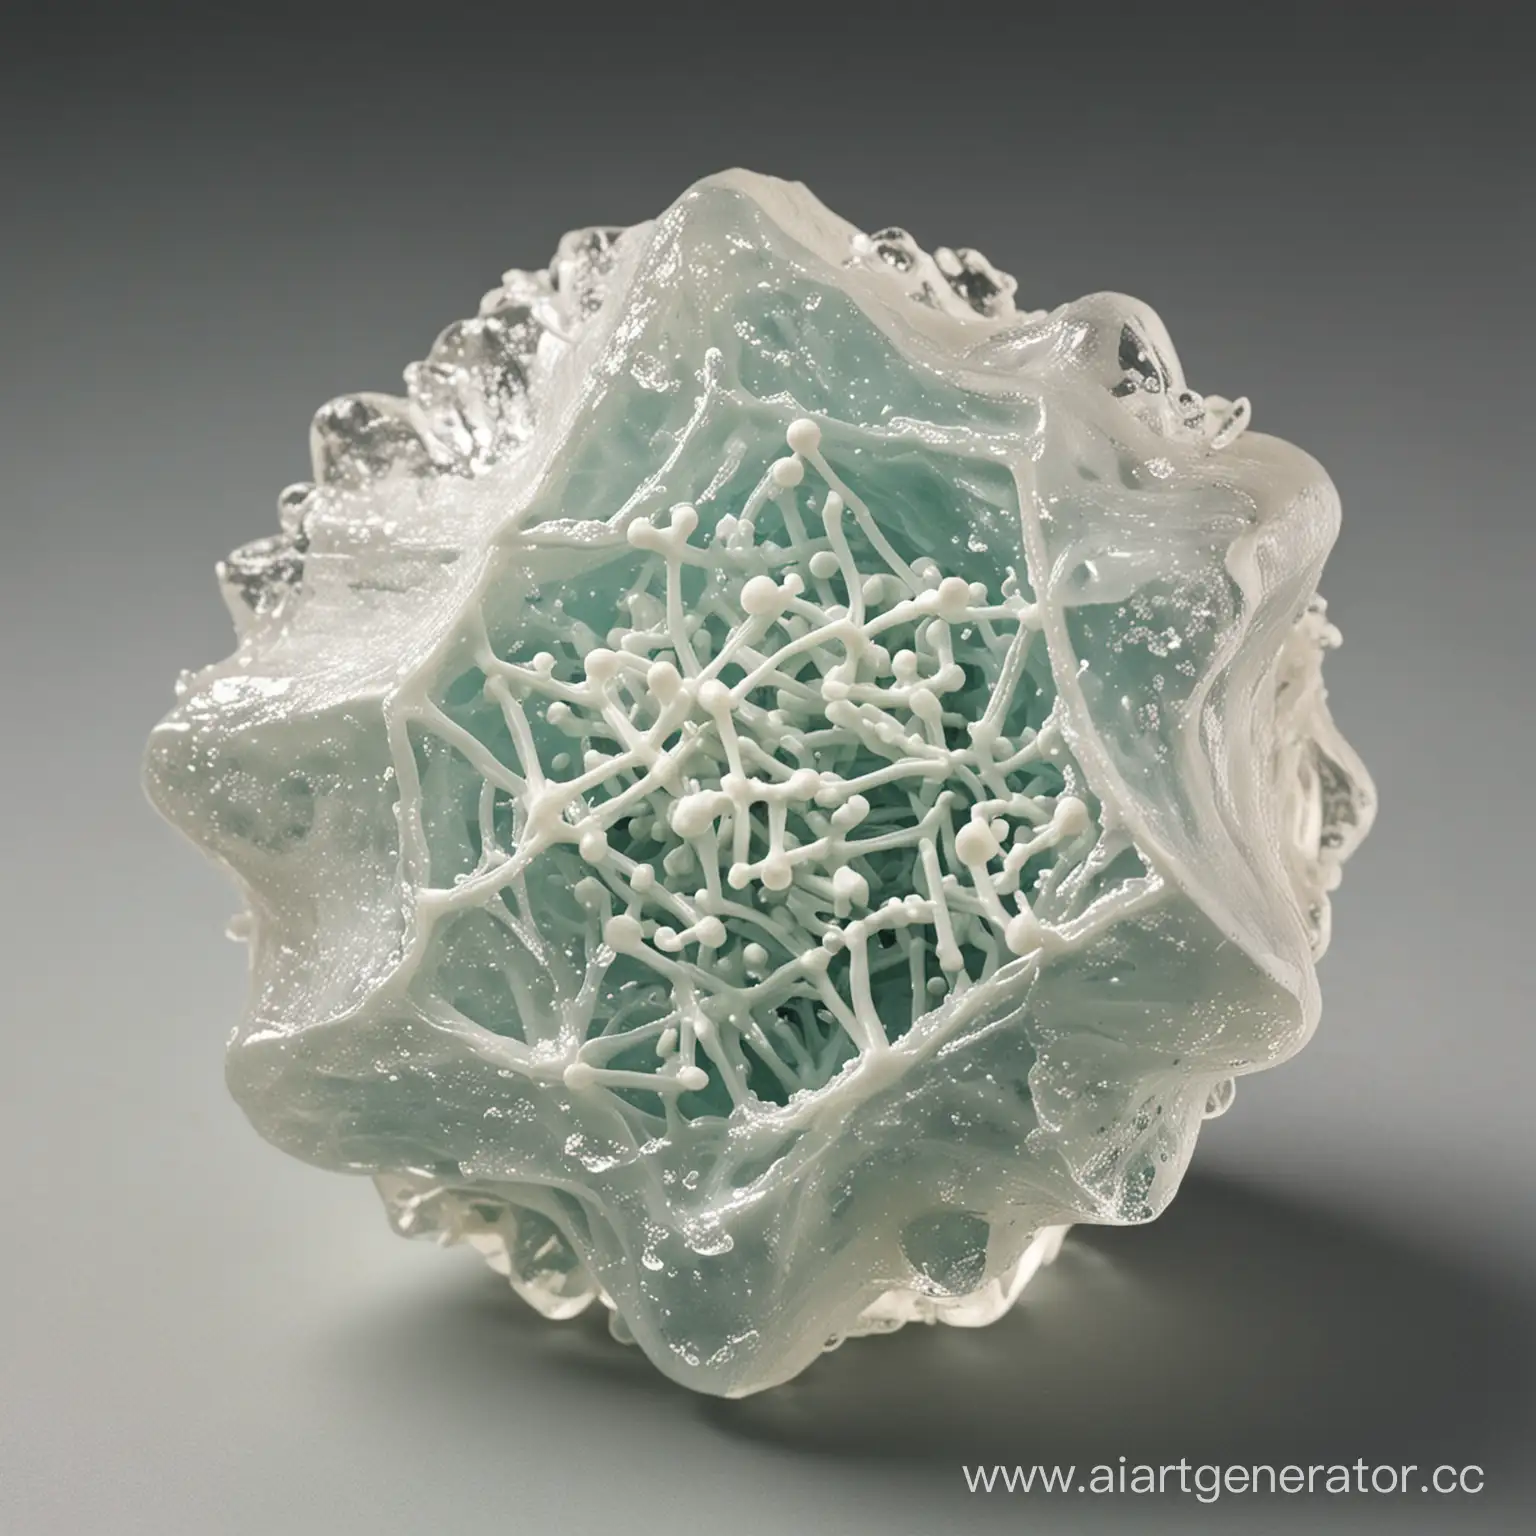 Realistic-Soap-Chemical-Structure-with-Special-Effects